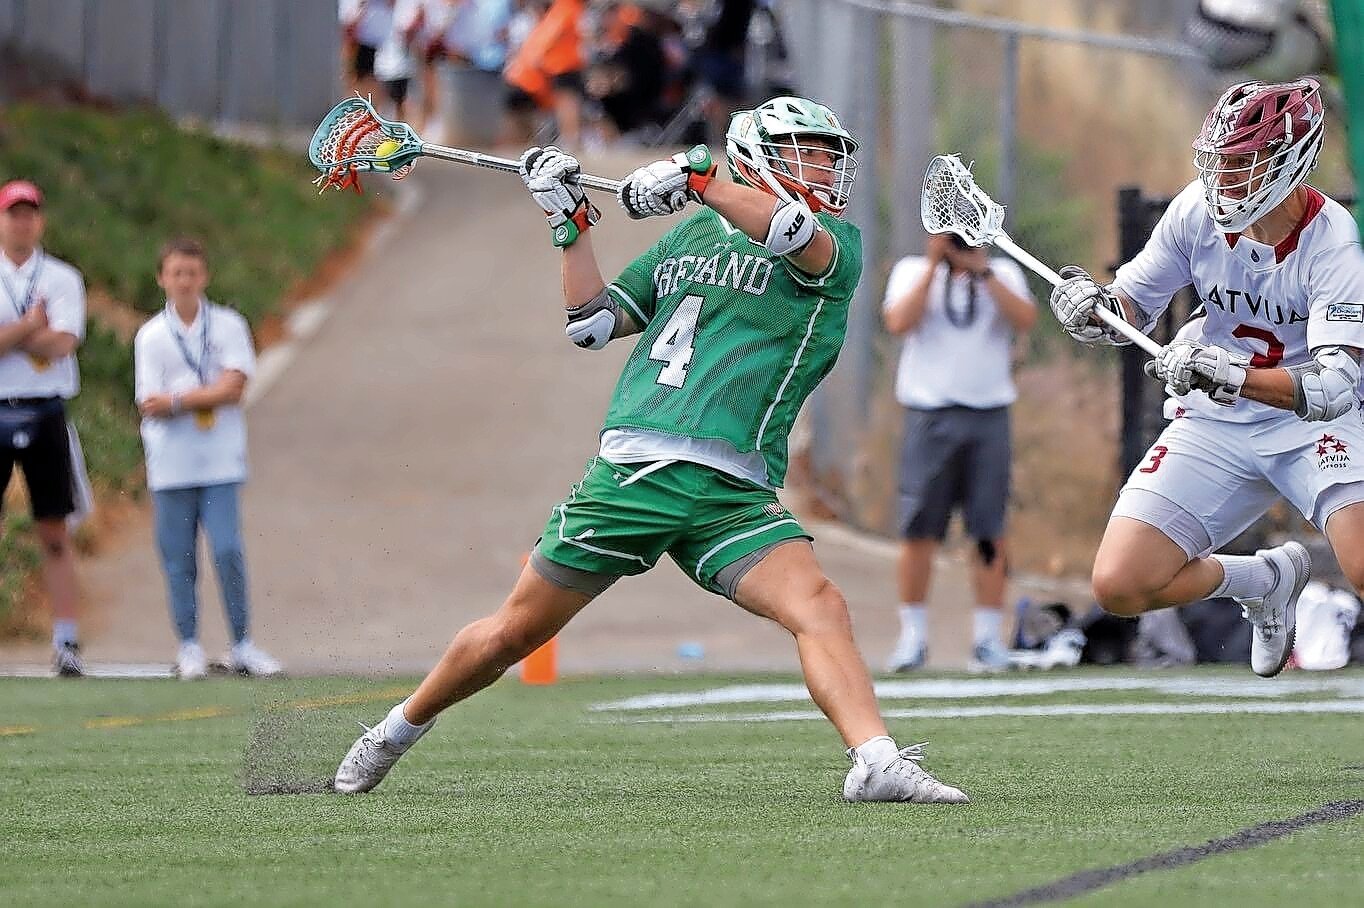 Tadhg O’Riordan had an experience of a lifetime playing and bonding alongside his Team Ireland teammates at the World Men’s Lacrosse Championships, which took place in San Diego in June. Team Ireland notched a 12th-place finish in the 30-team tournament, while Team USA topped Team Canada for the gold medal.